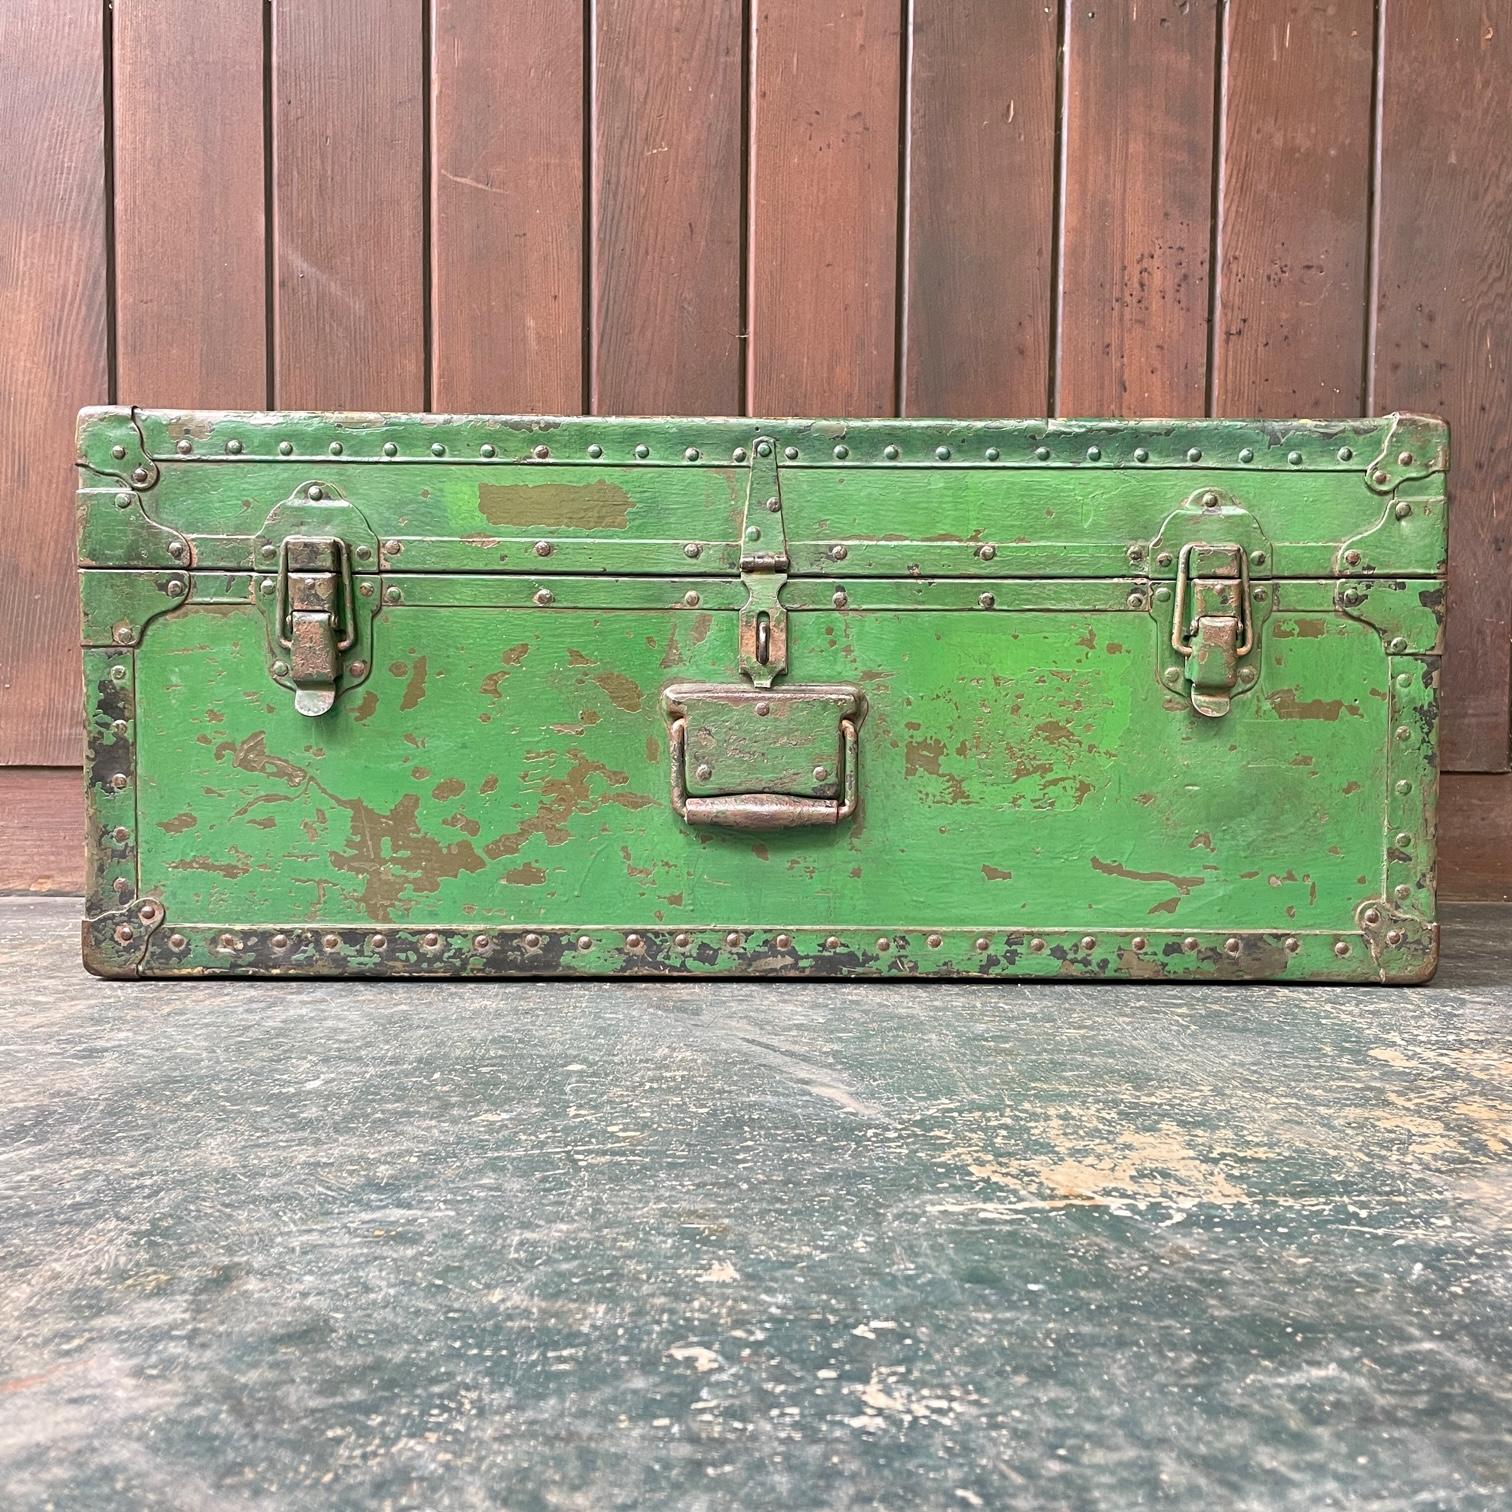 Machine-Made 1940s Vulcanized US Army Trunk Box Table Pedestal Retail Display Heavy Patina